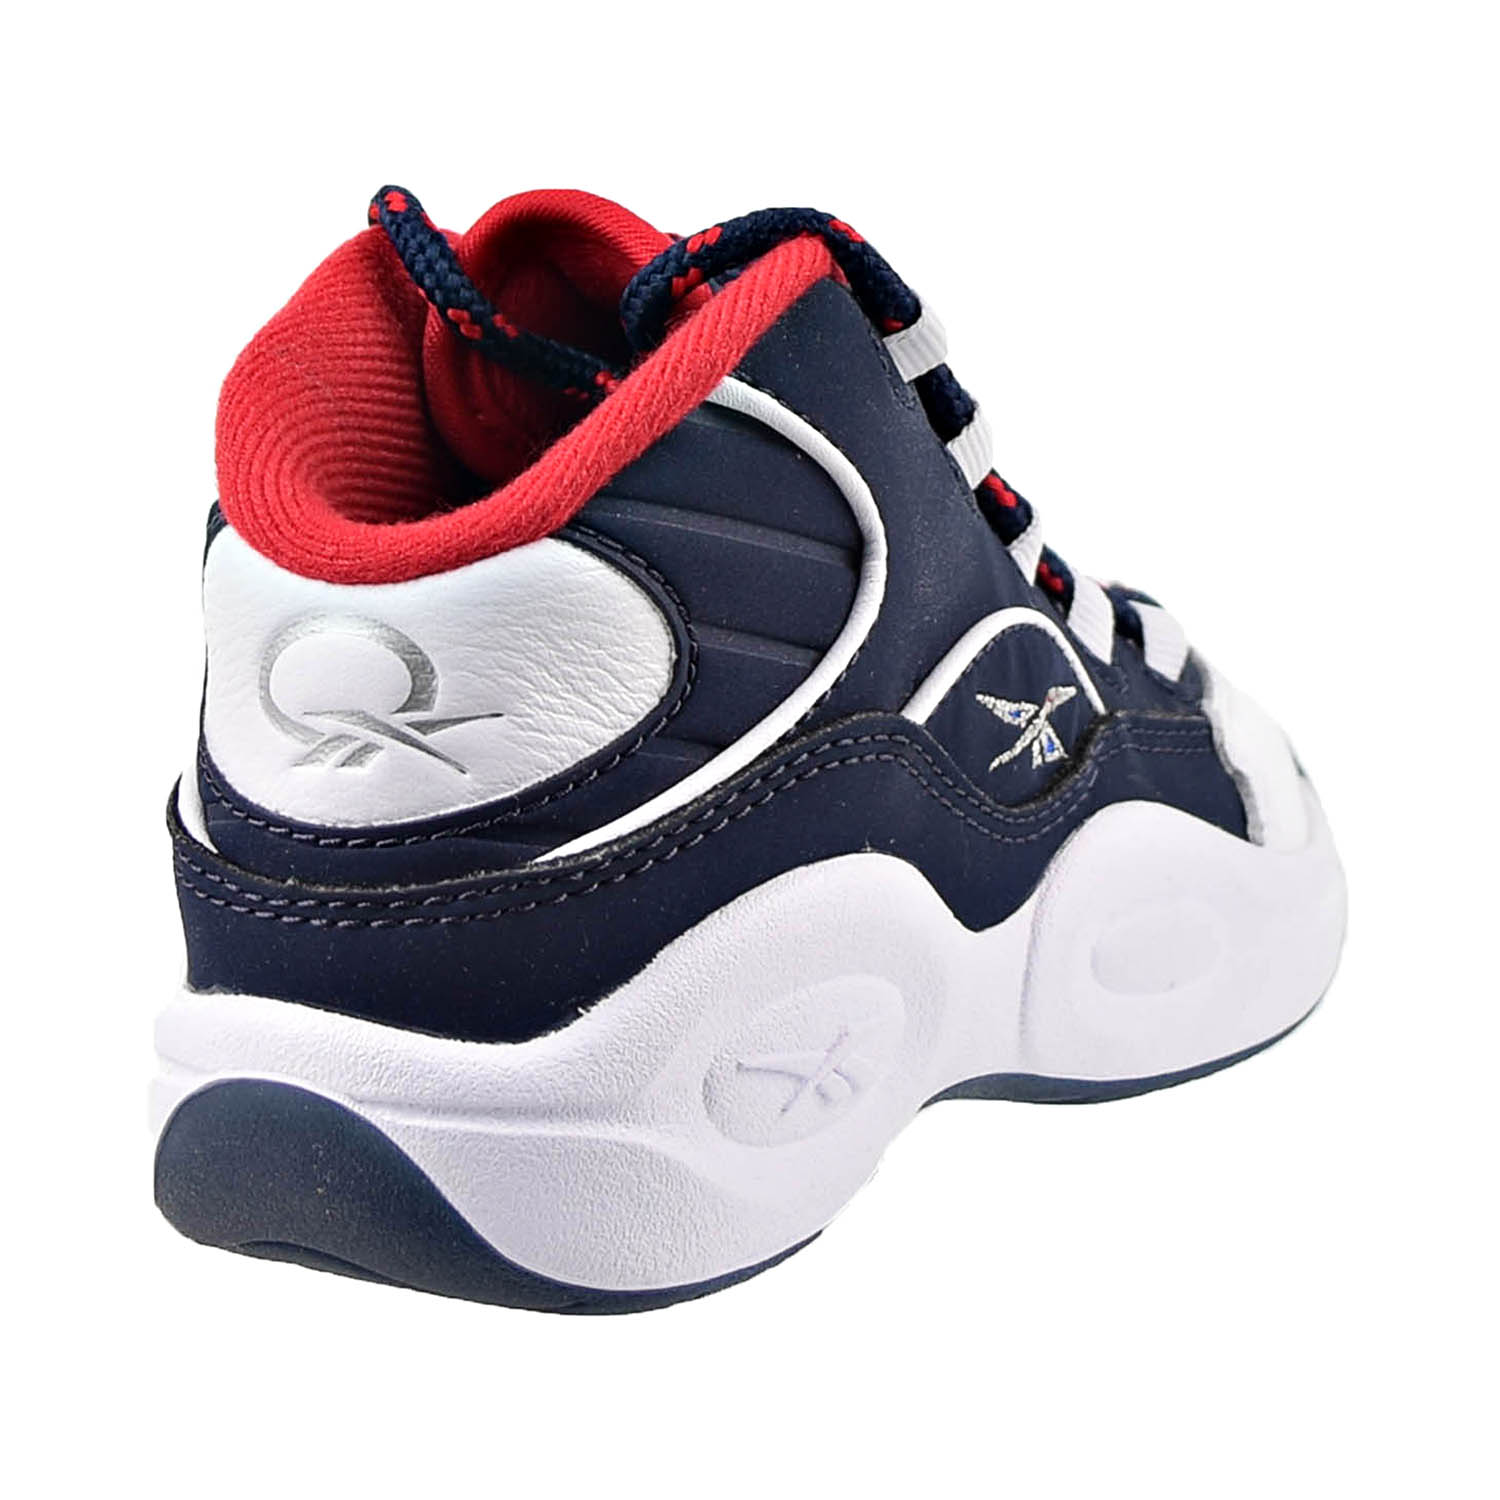 Reebok Question Mid Little Kids' Shoes White-Navy-Red gx0387